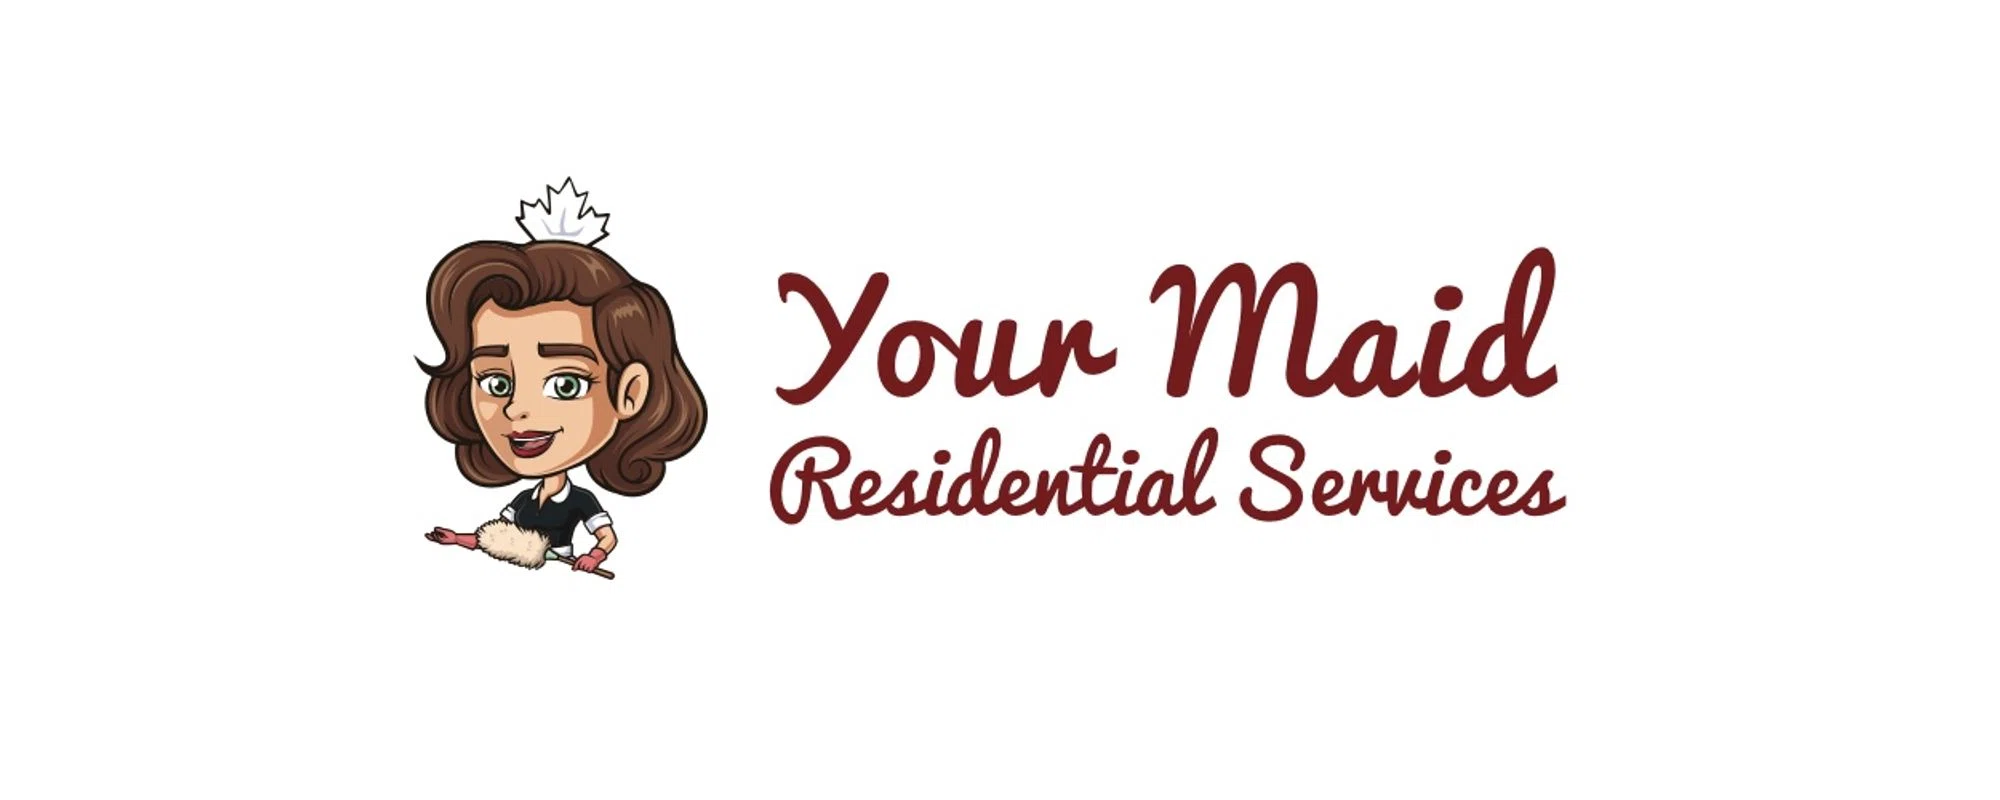 Your Maid Services